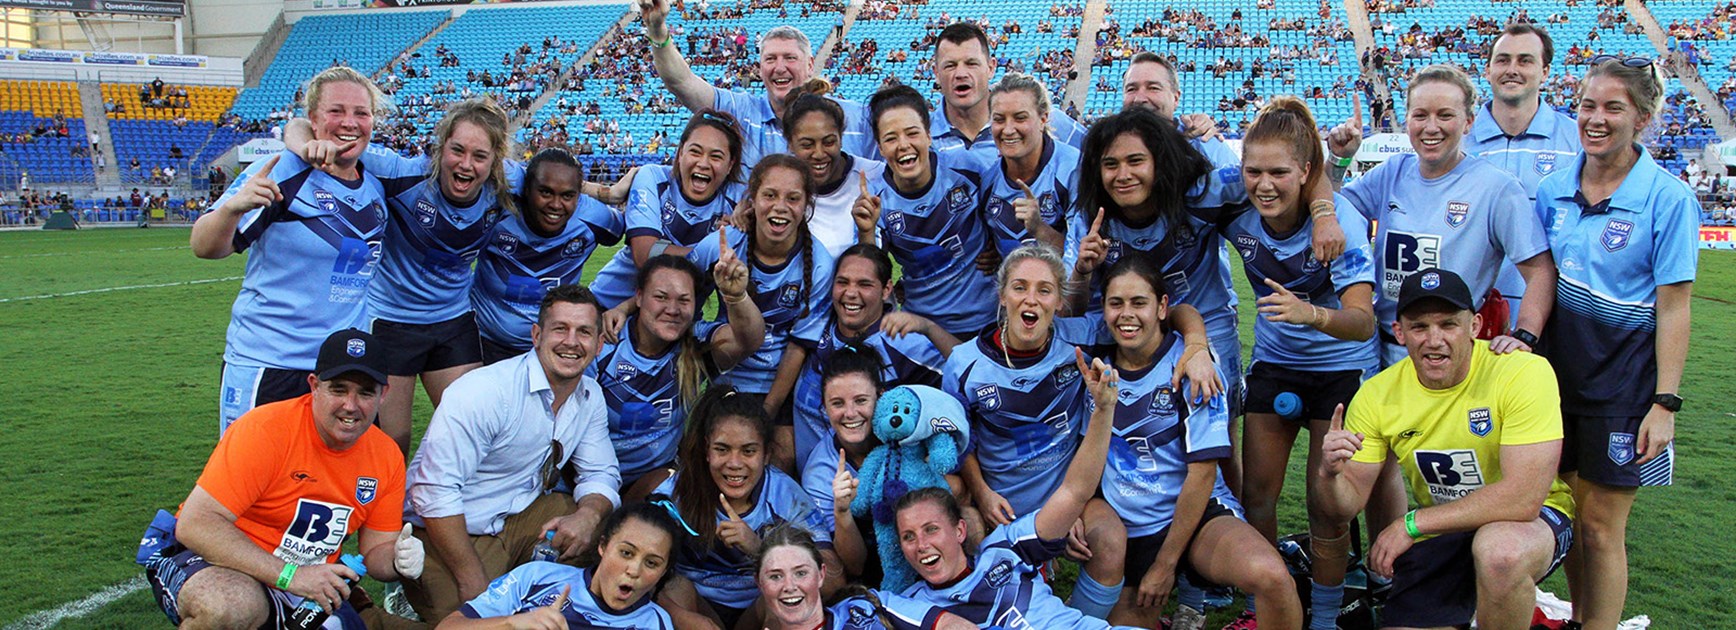 The NSW Women's team celebrate their first Interstate Challenge victory.